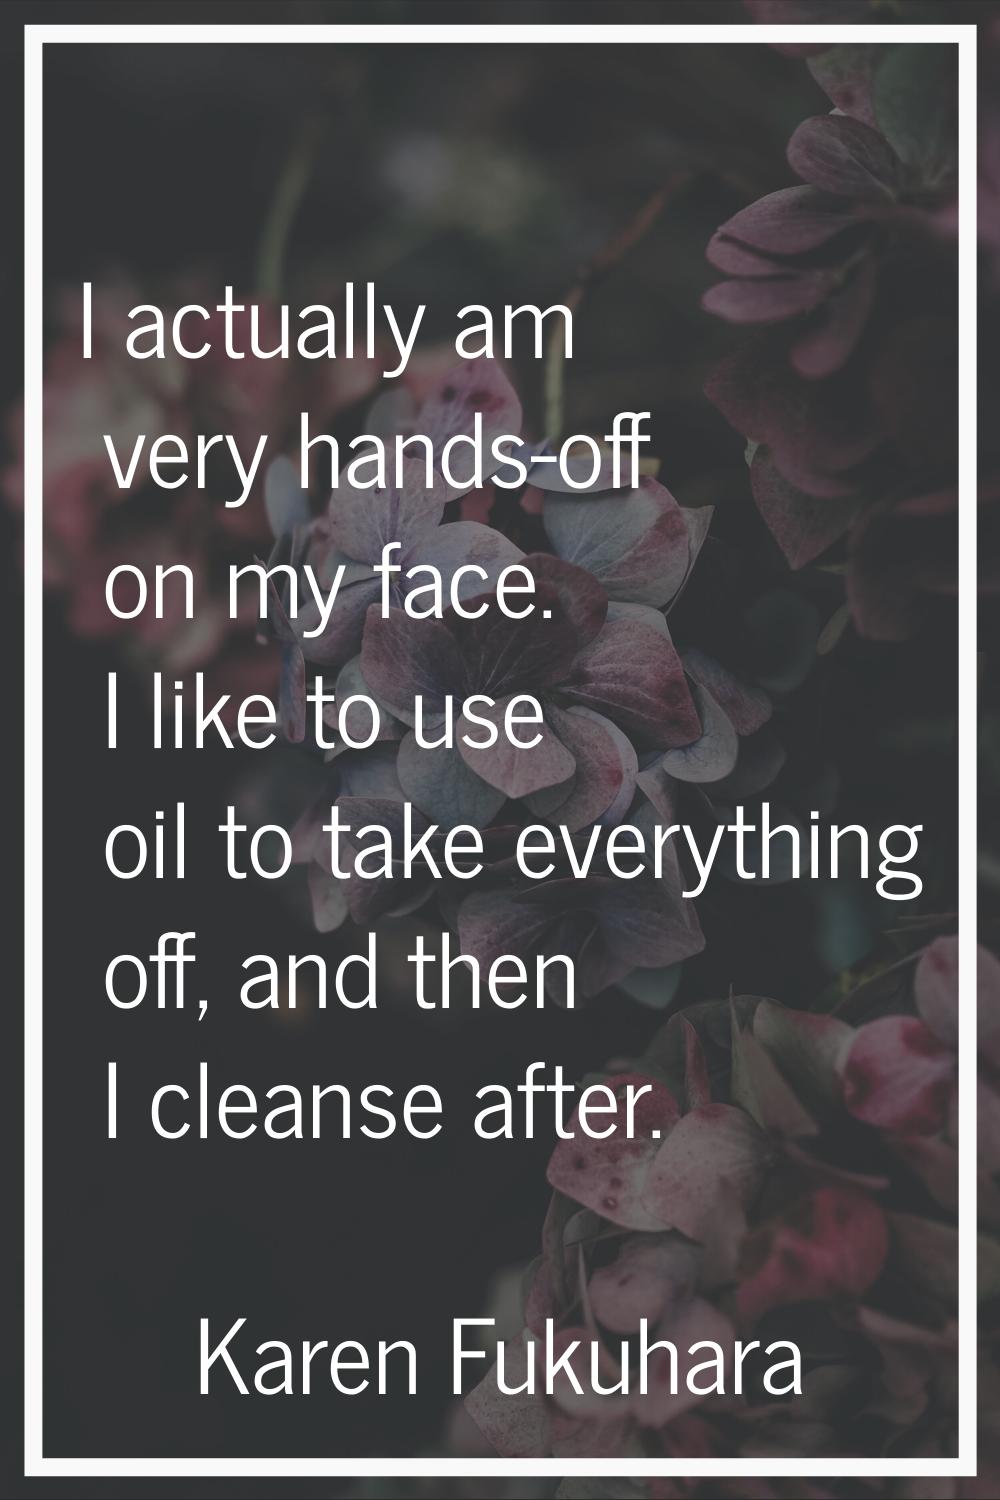 I actually am very hands-off on my face. I like to use oil to take everything off, and then I clean